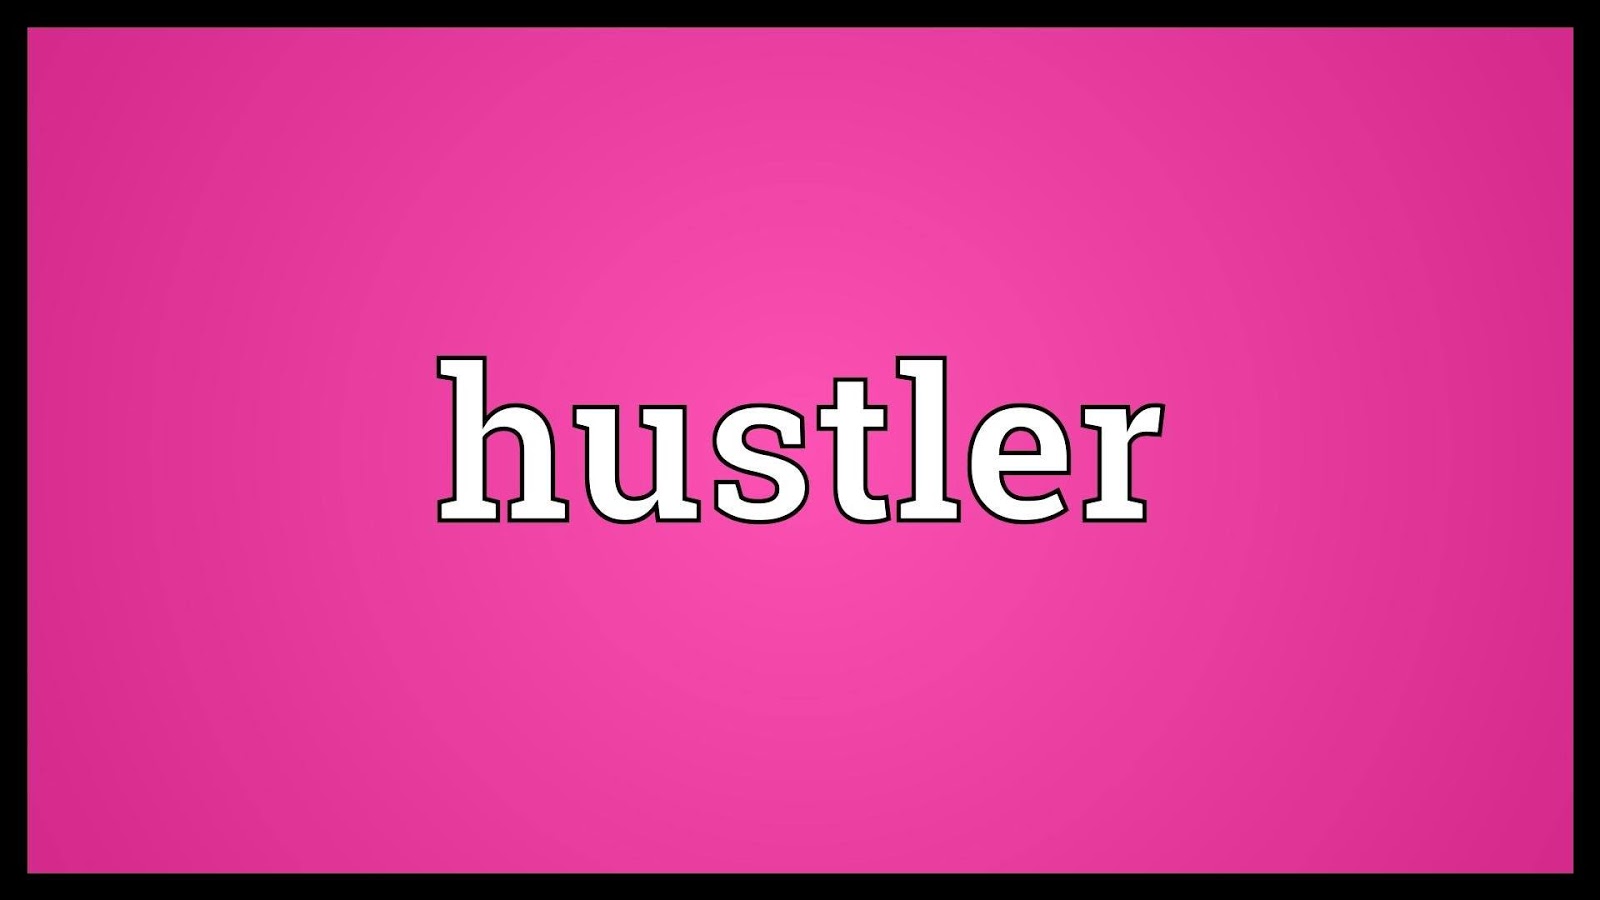 I remember an ex who would occasionally tell me: "You’re not a hustler, you will never 'fight...